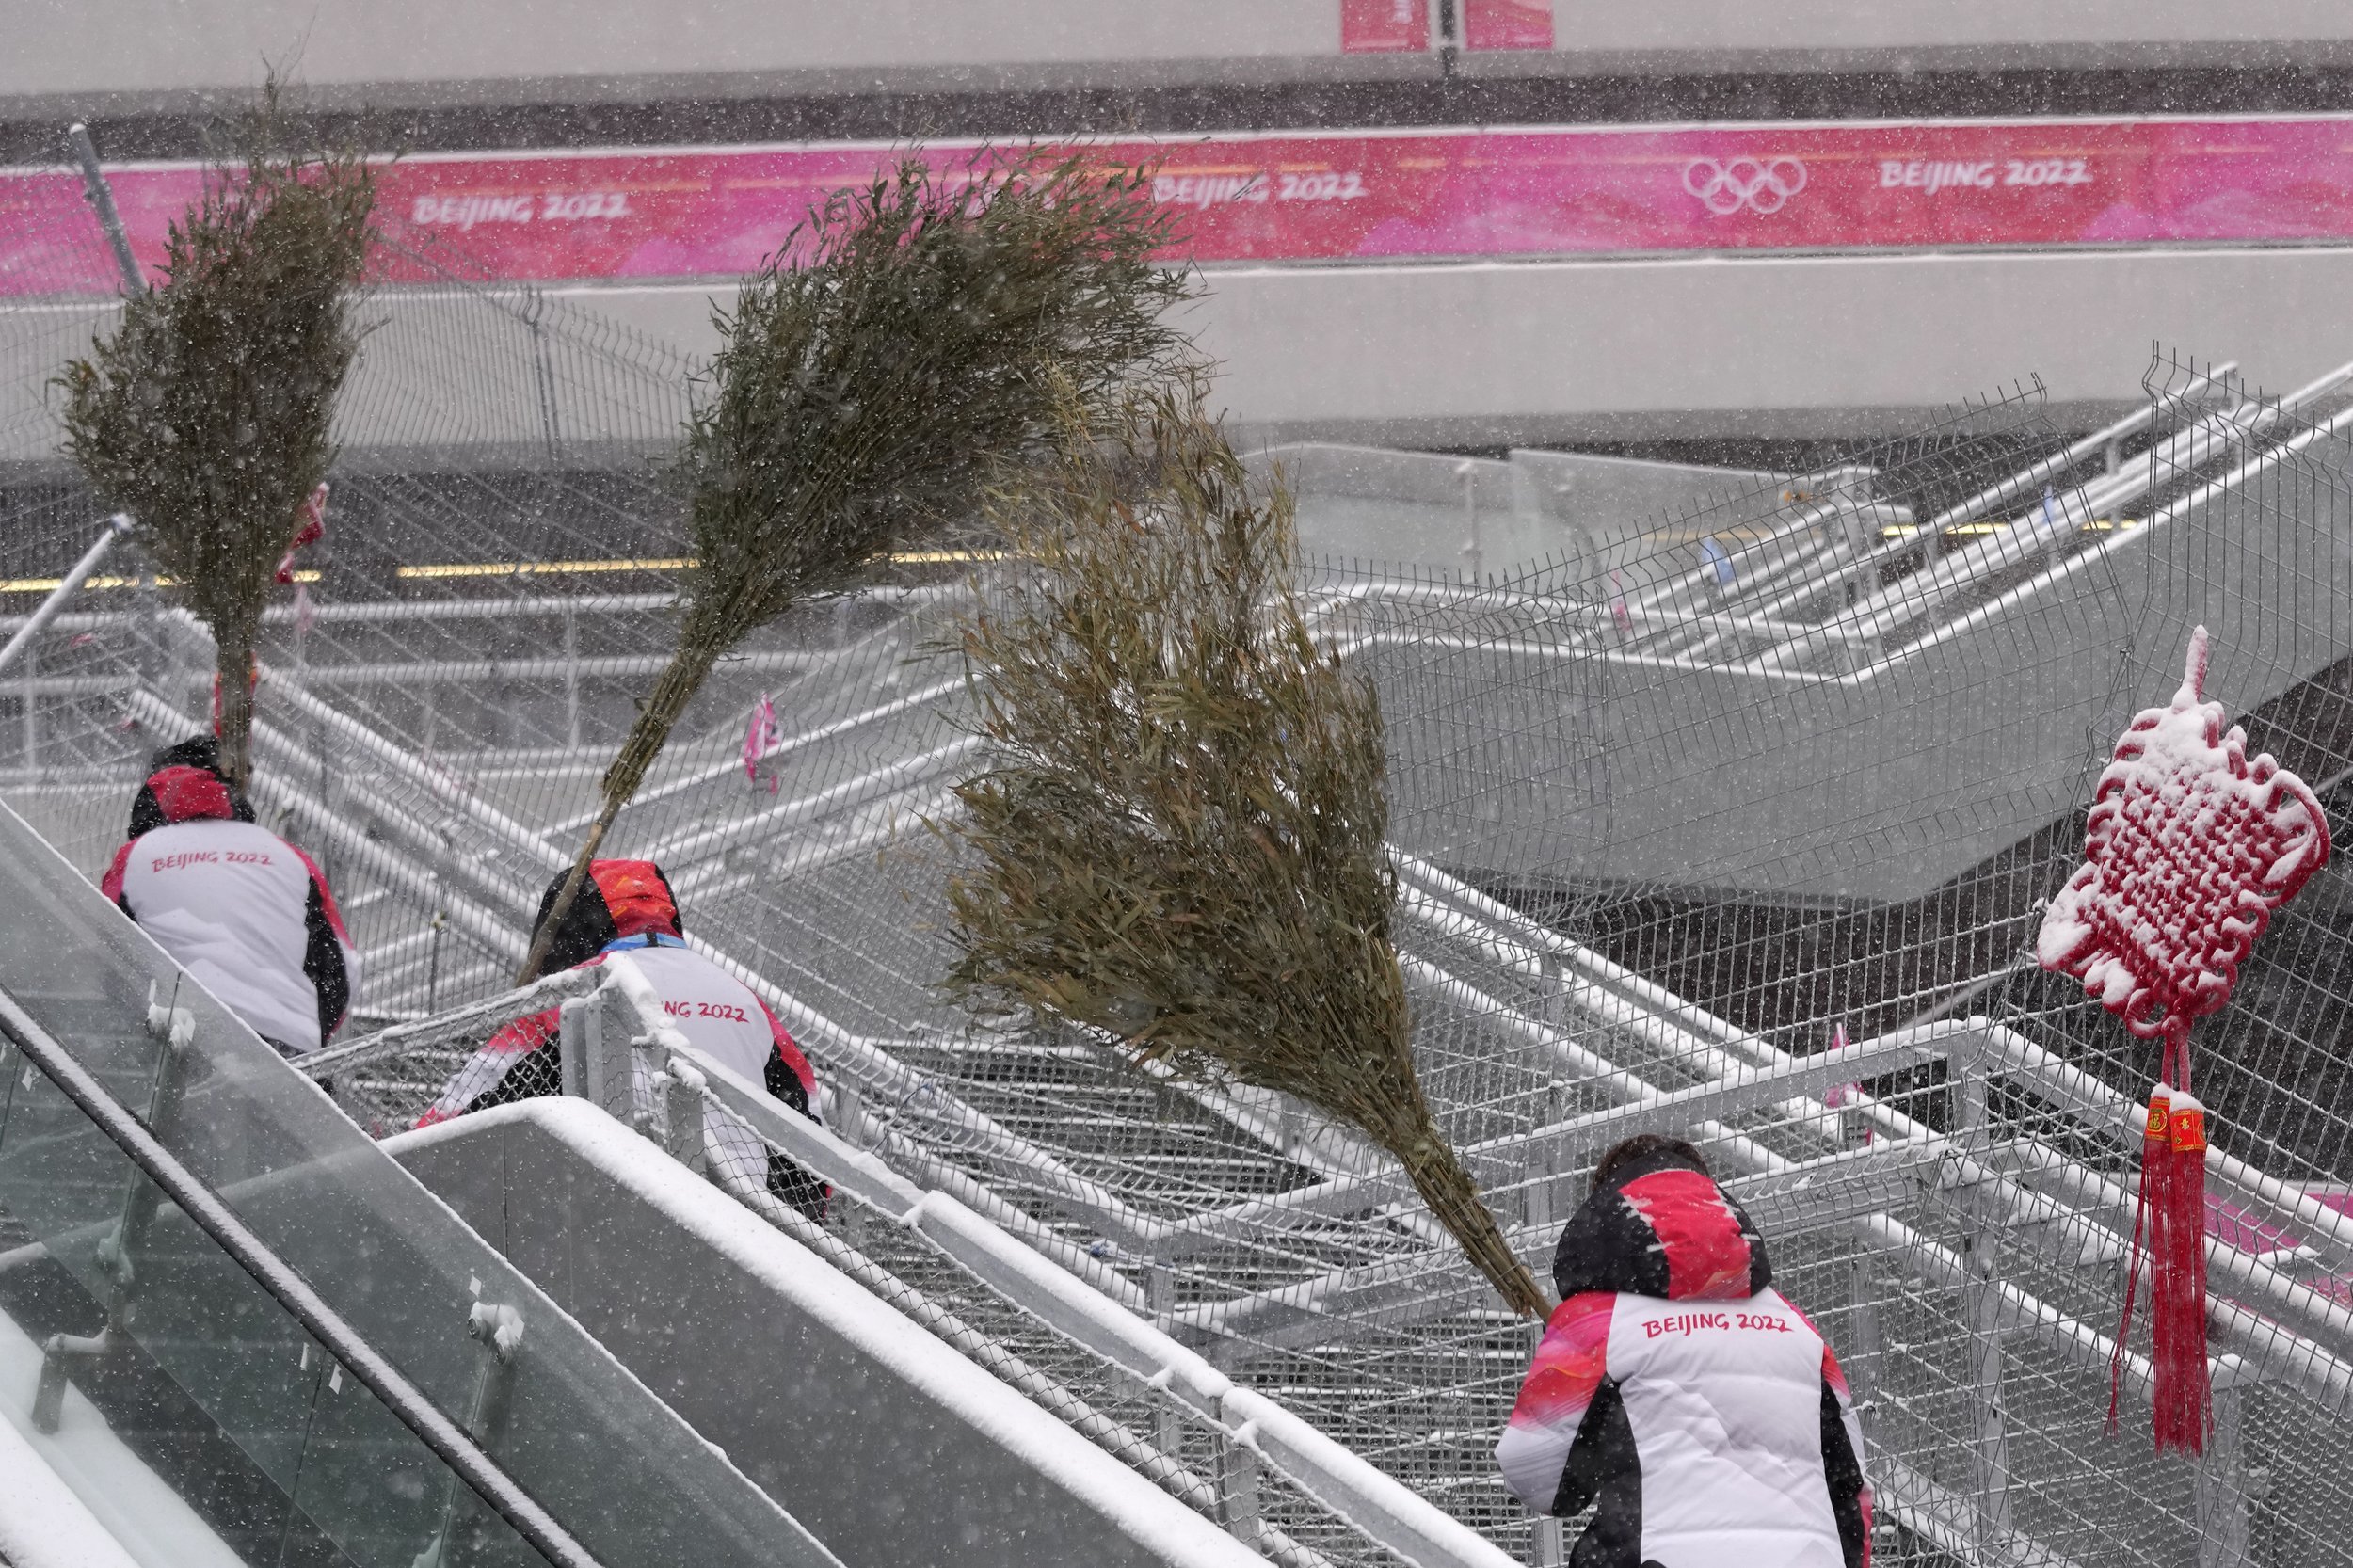  Workers use bamboo branches to clear the snow near the finish area of the alpine ski venue at the 2022 Winter Olympics, Sunday, Feb. 13, 2022, in the Yanqing district of Beijing. (AP Photo/Luca Bruno) 